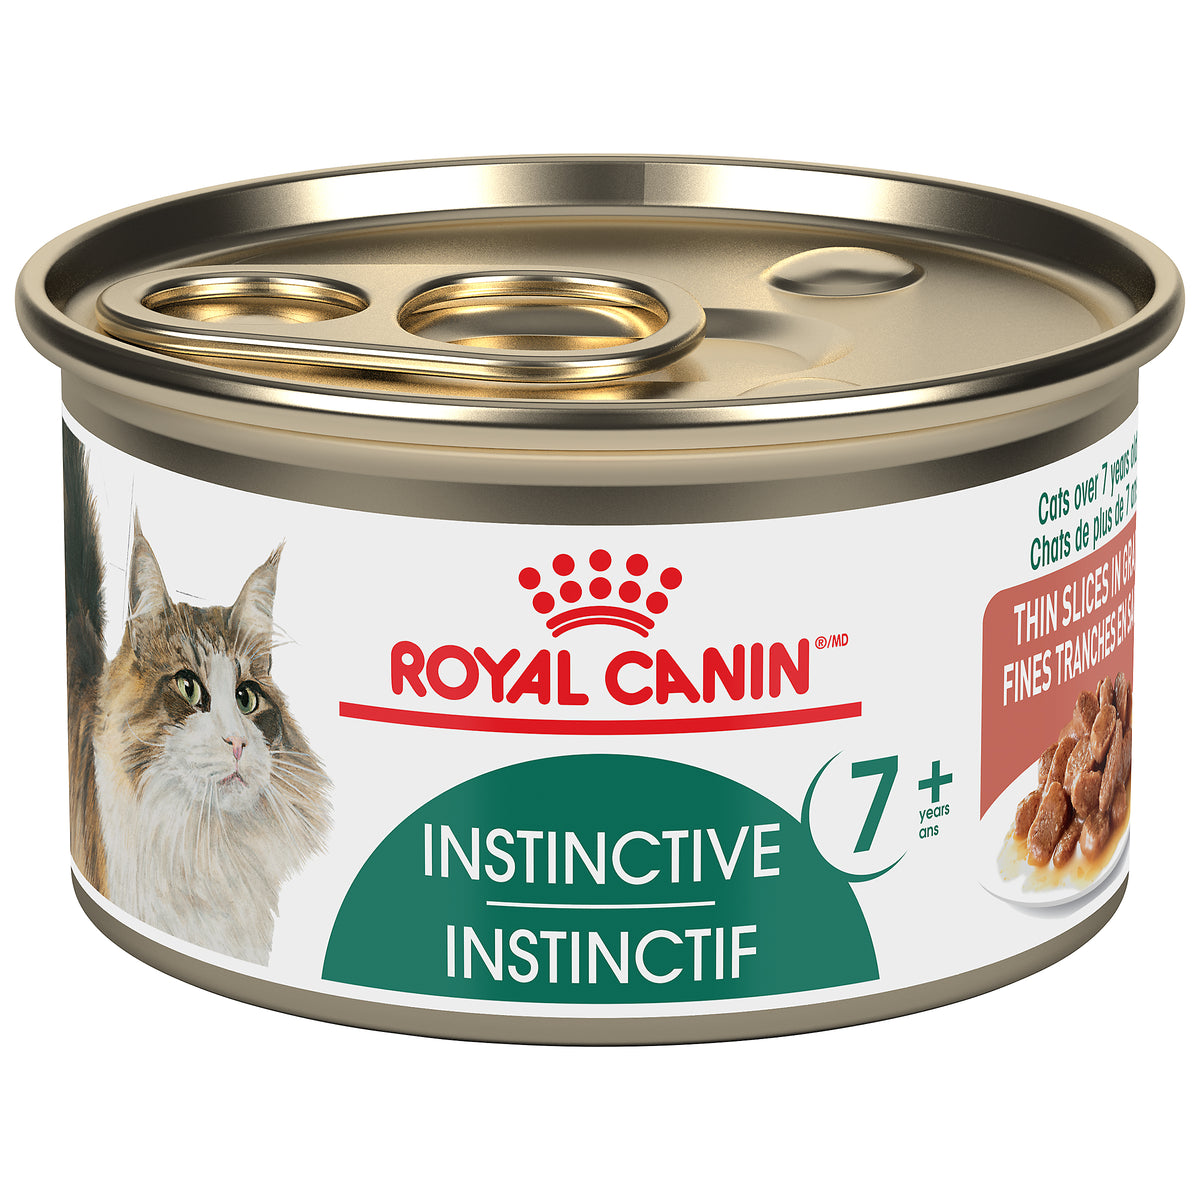 Royal Canin Instinctive 7+ (Thin Slices in Gravy) - Wet Canned cat food